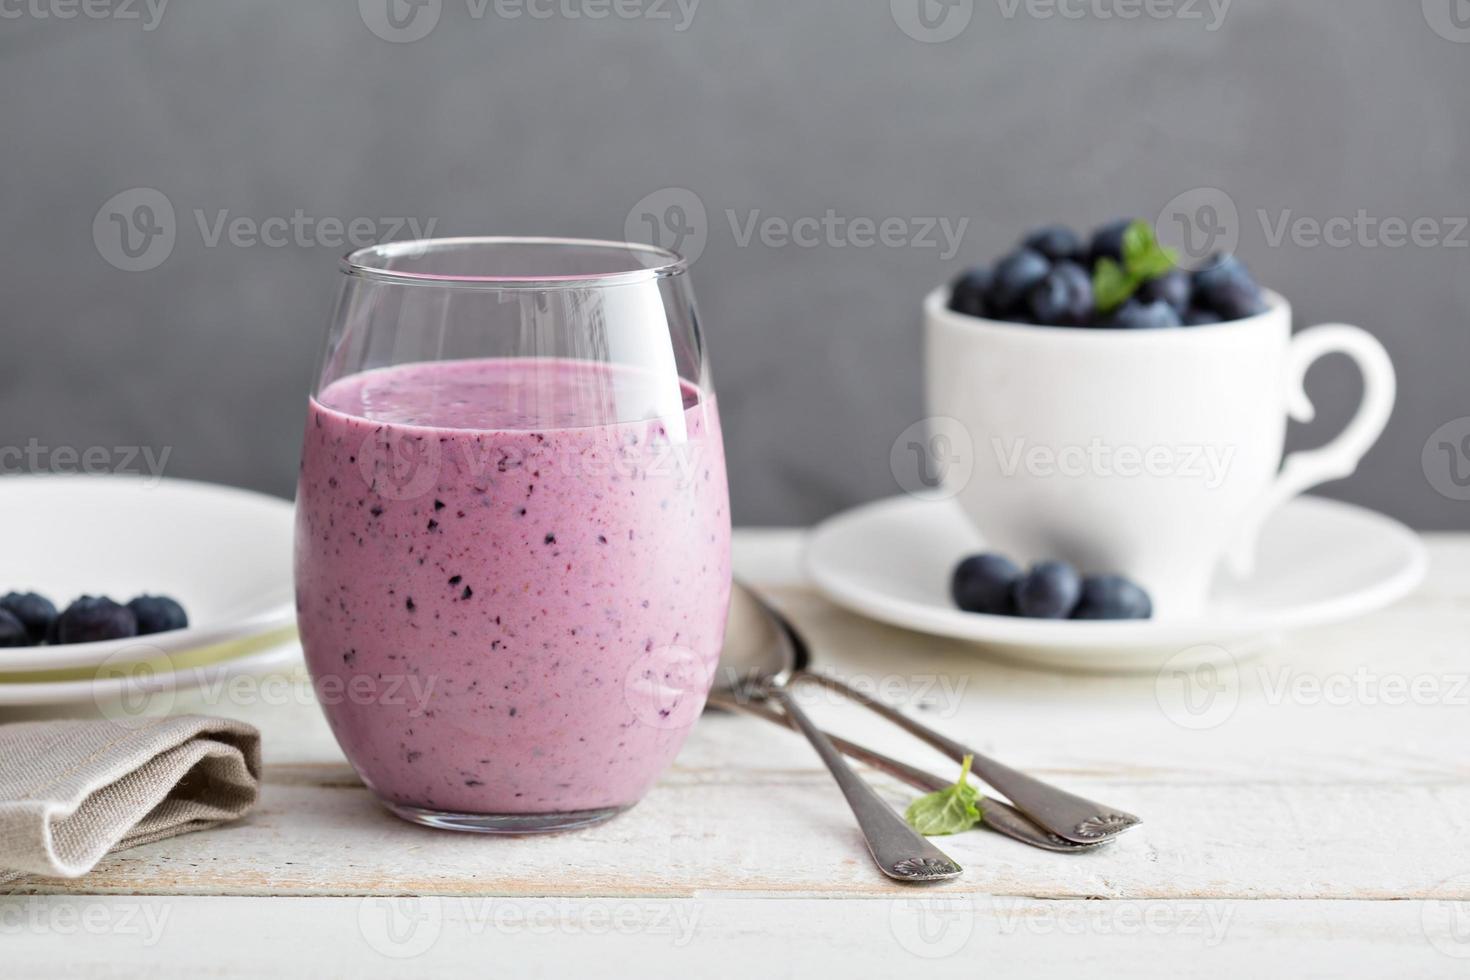 Blueberry banana smoothie in a glass photo